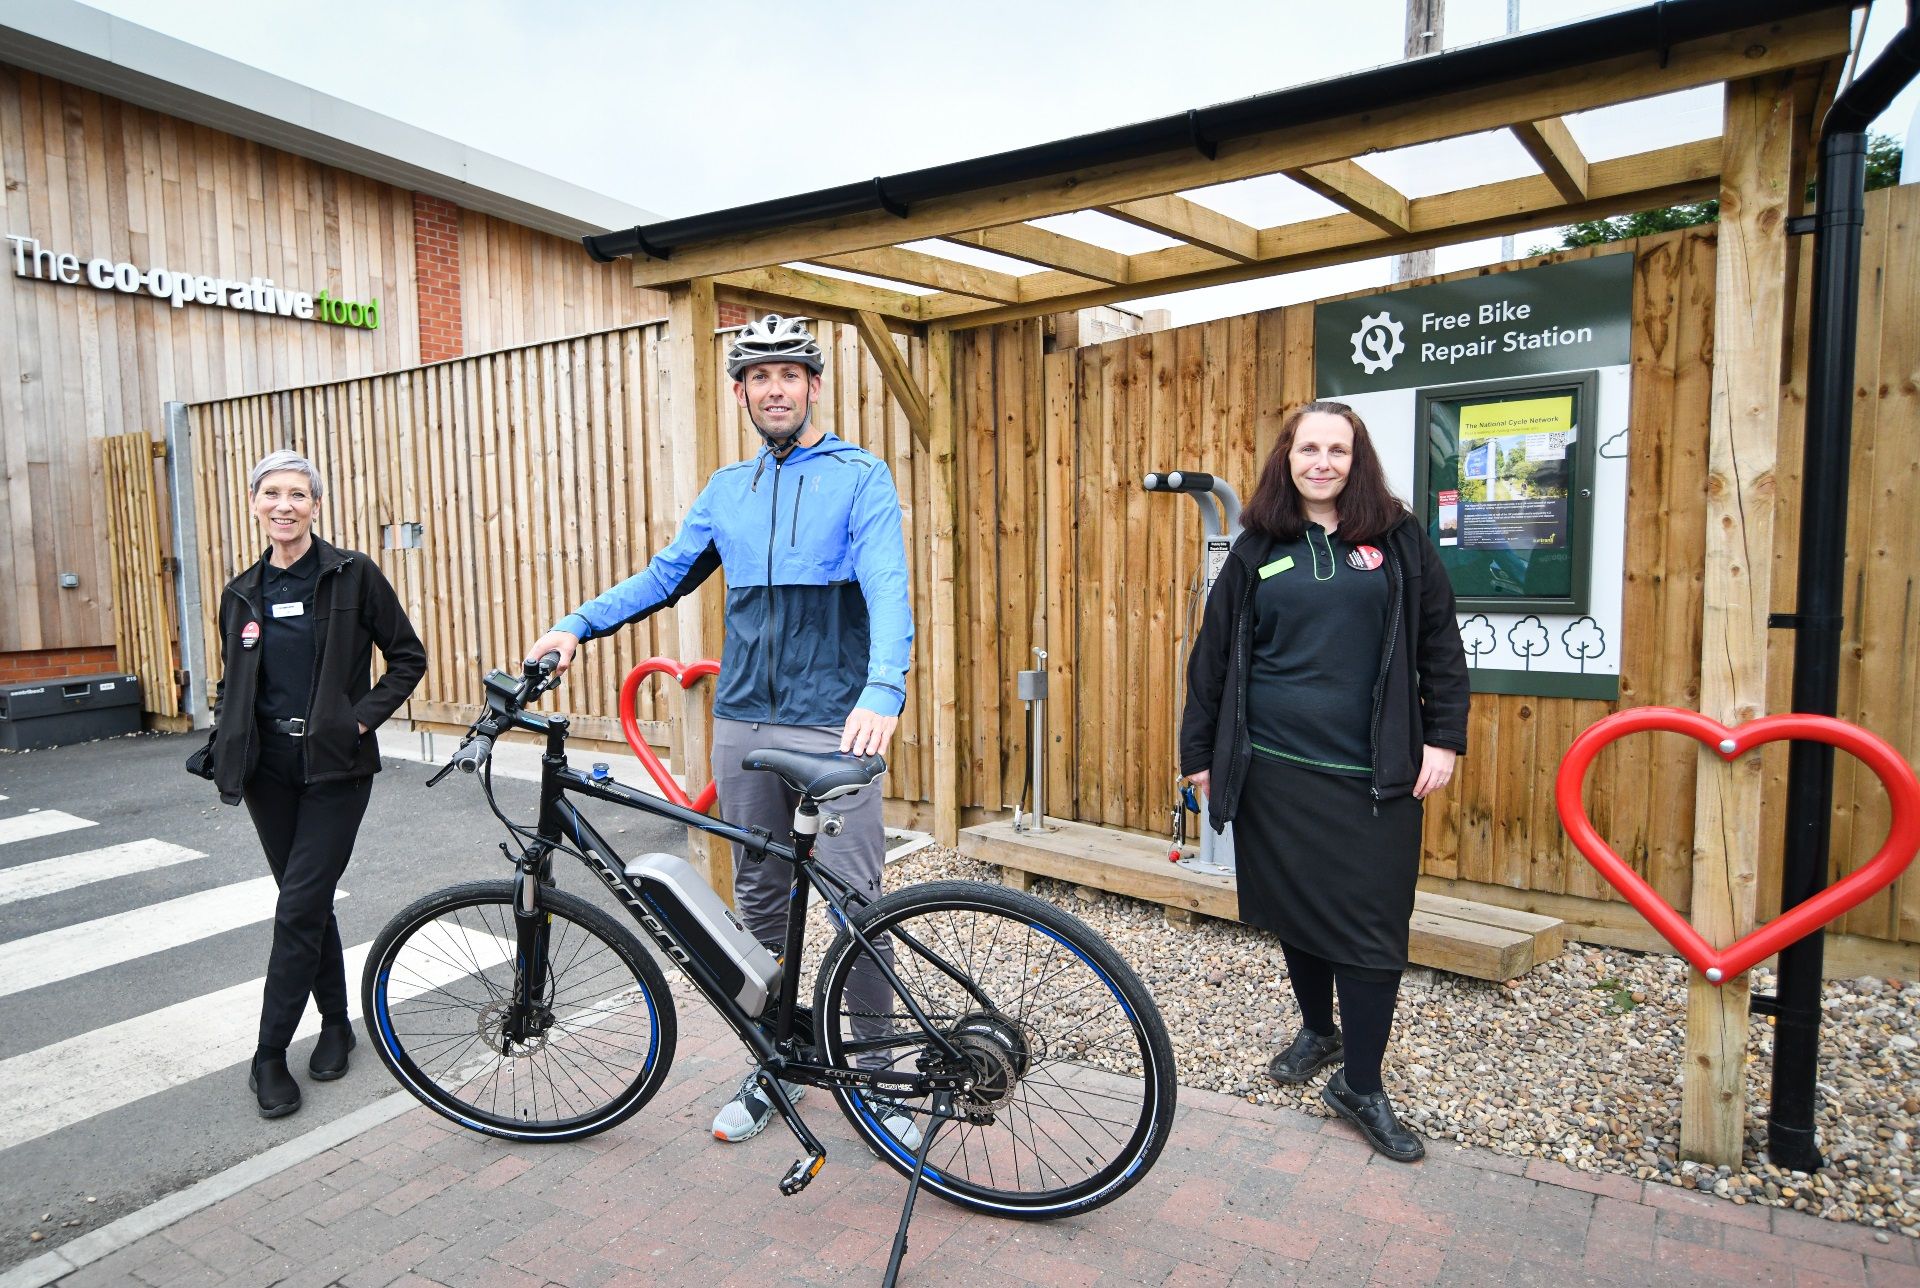 New cycle repair stations rolled out at 22 Central England Co-op sites to encourage cycle use